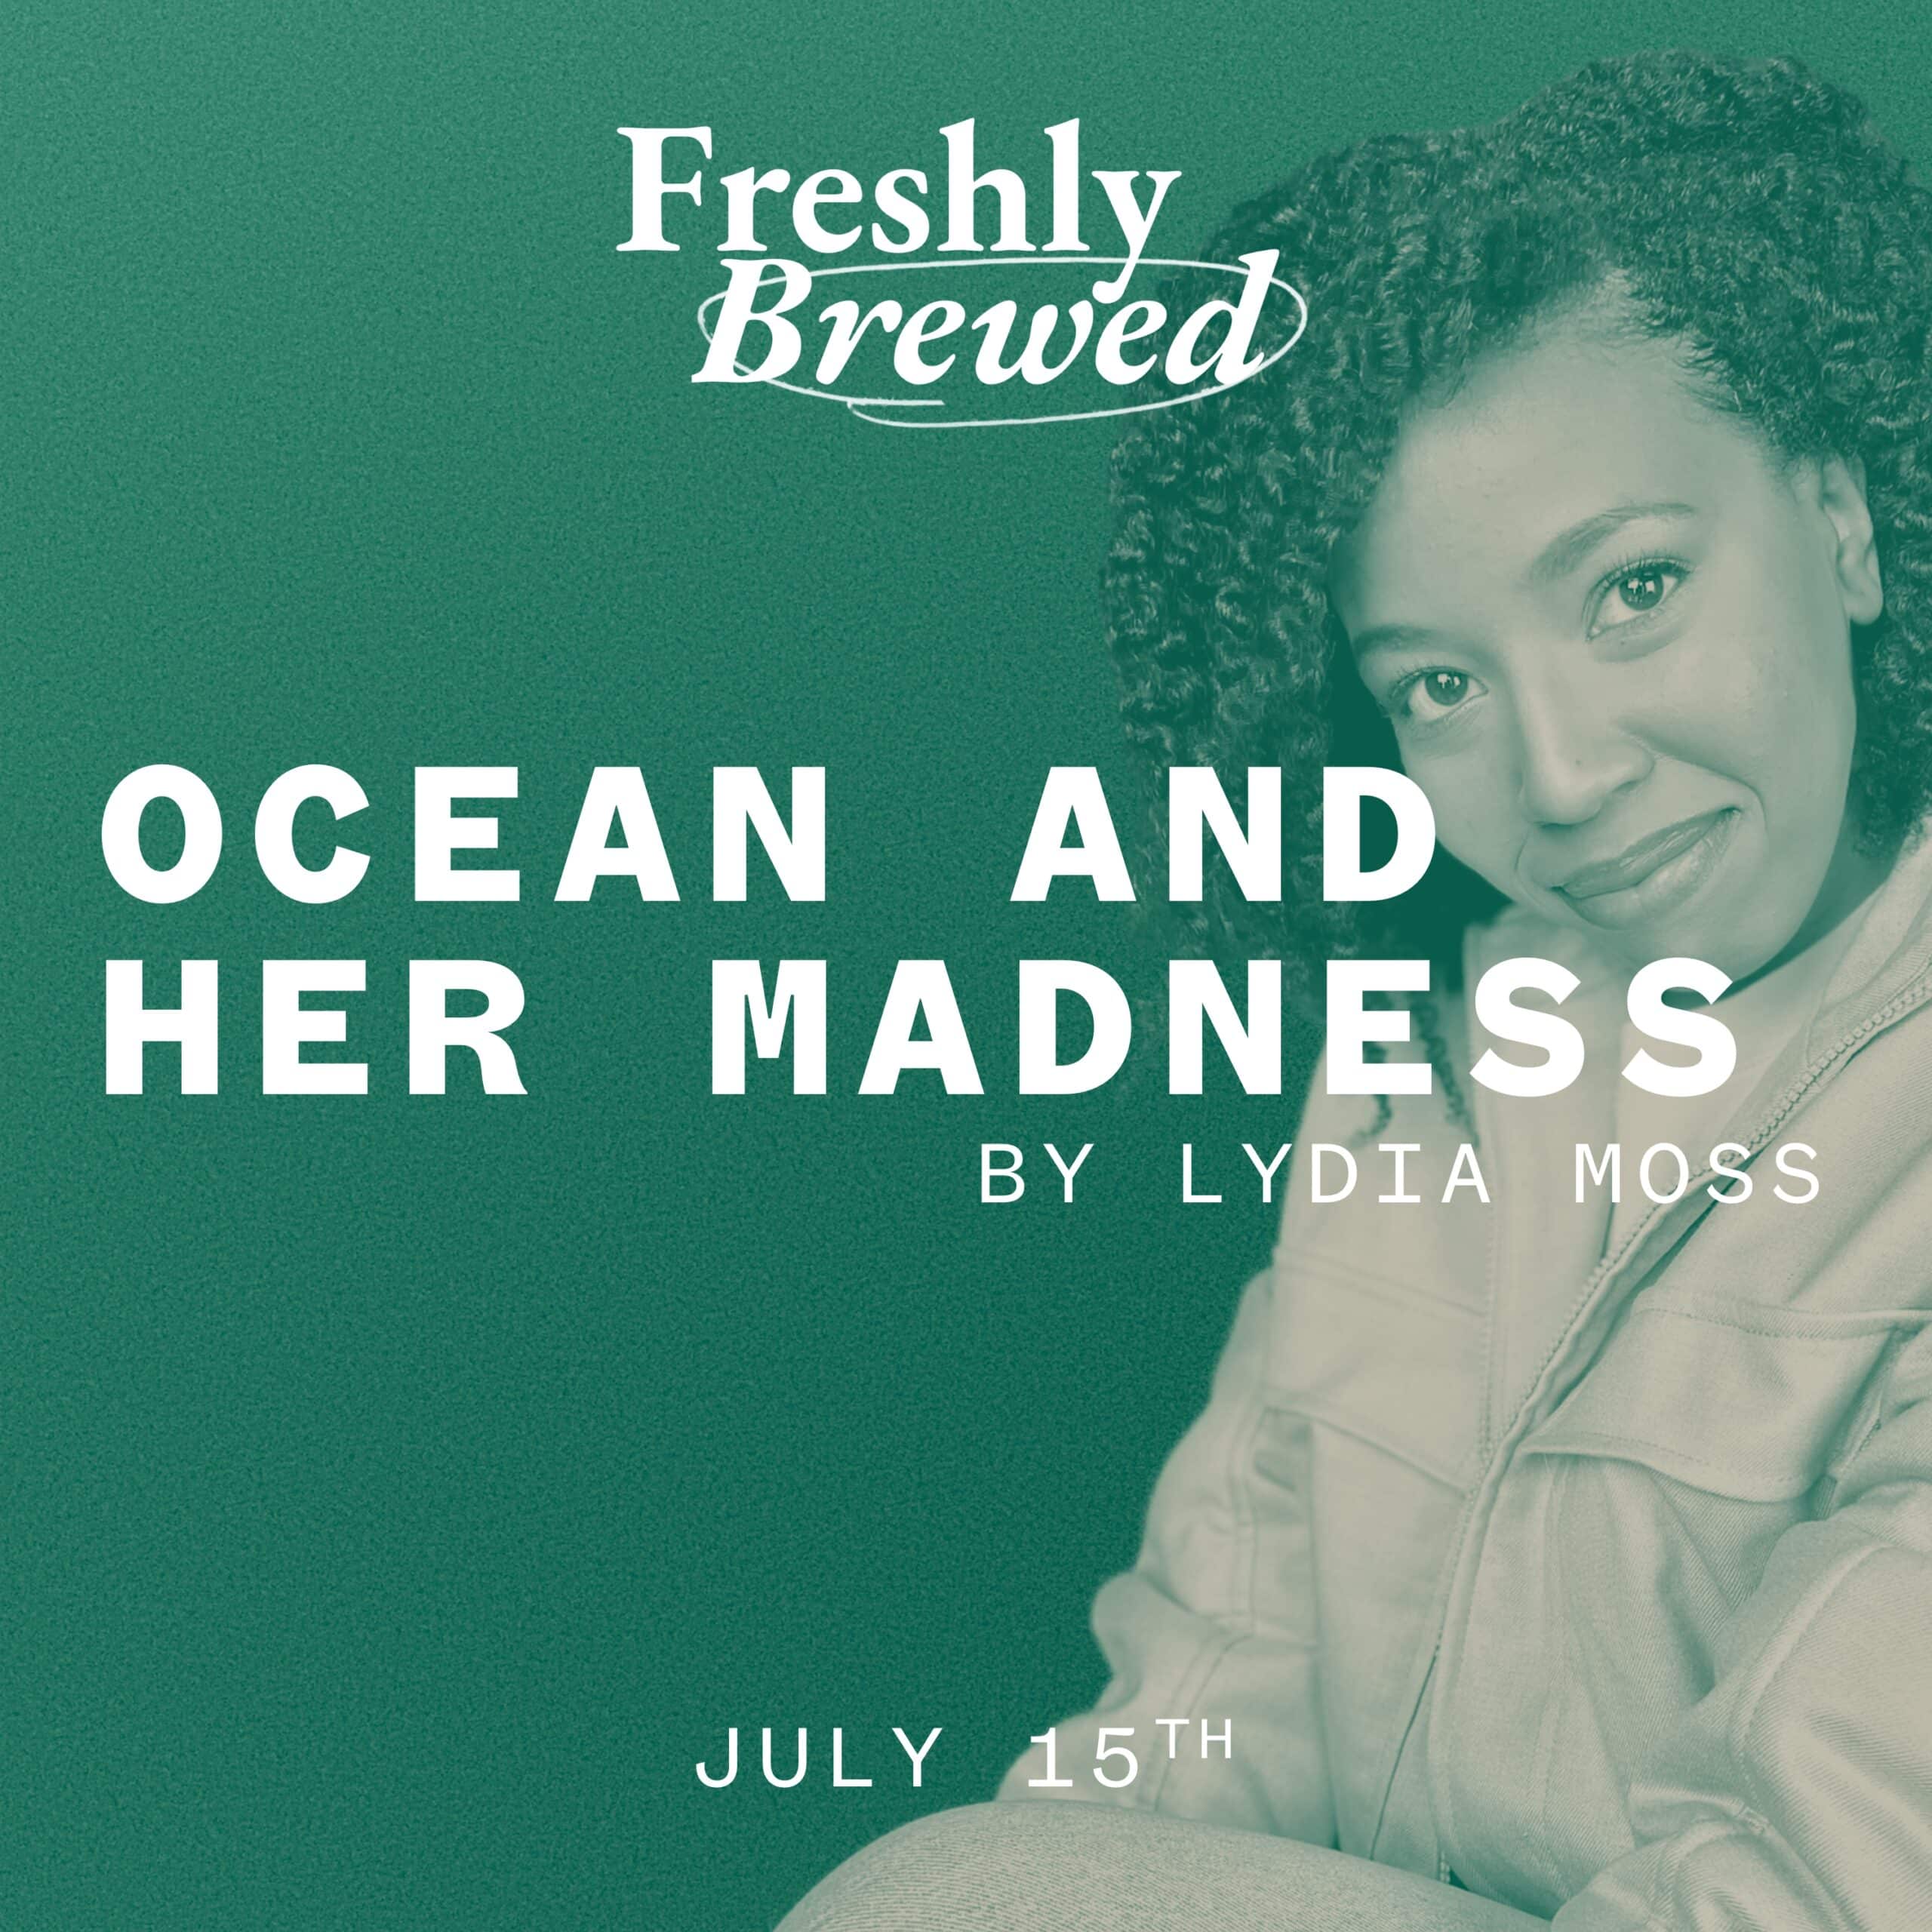 OCEAN AND HER MADNESS by Lydia Moss